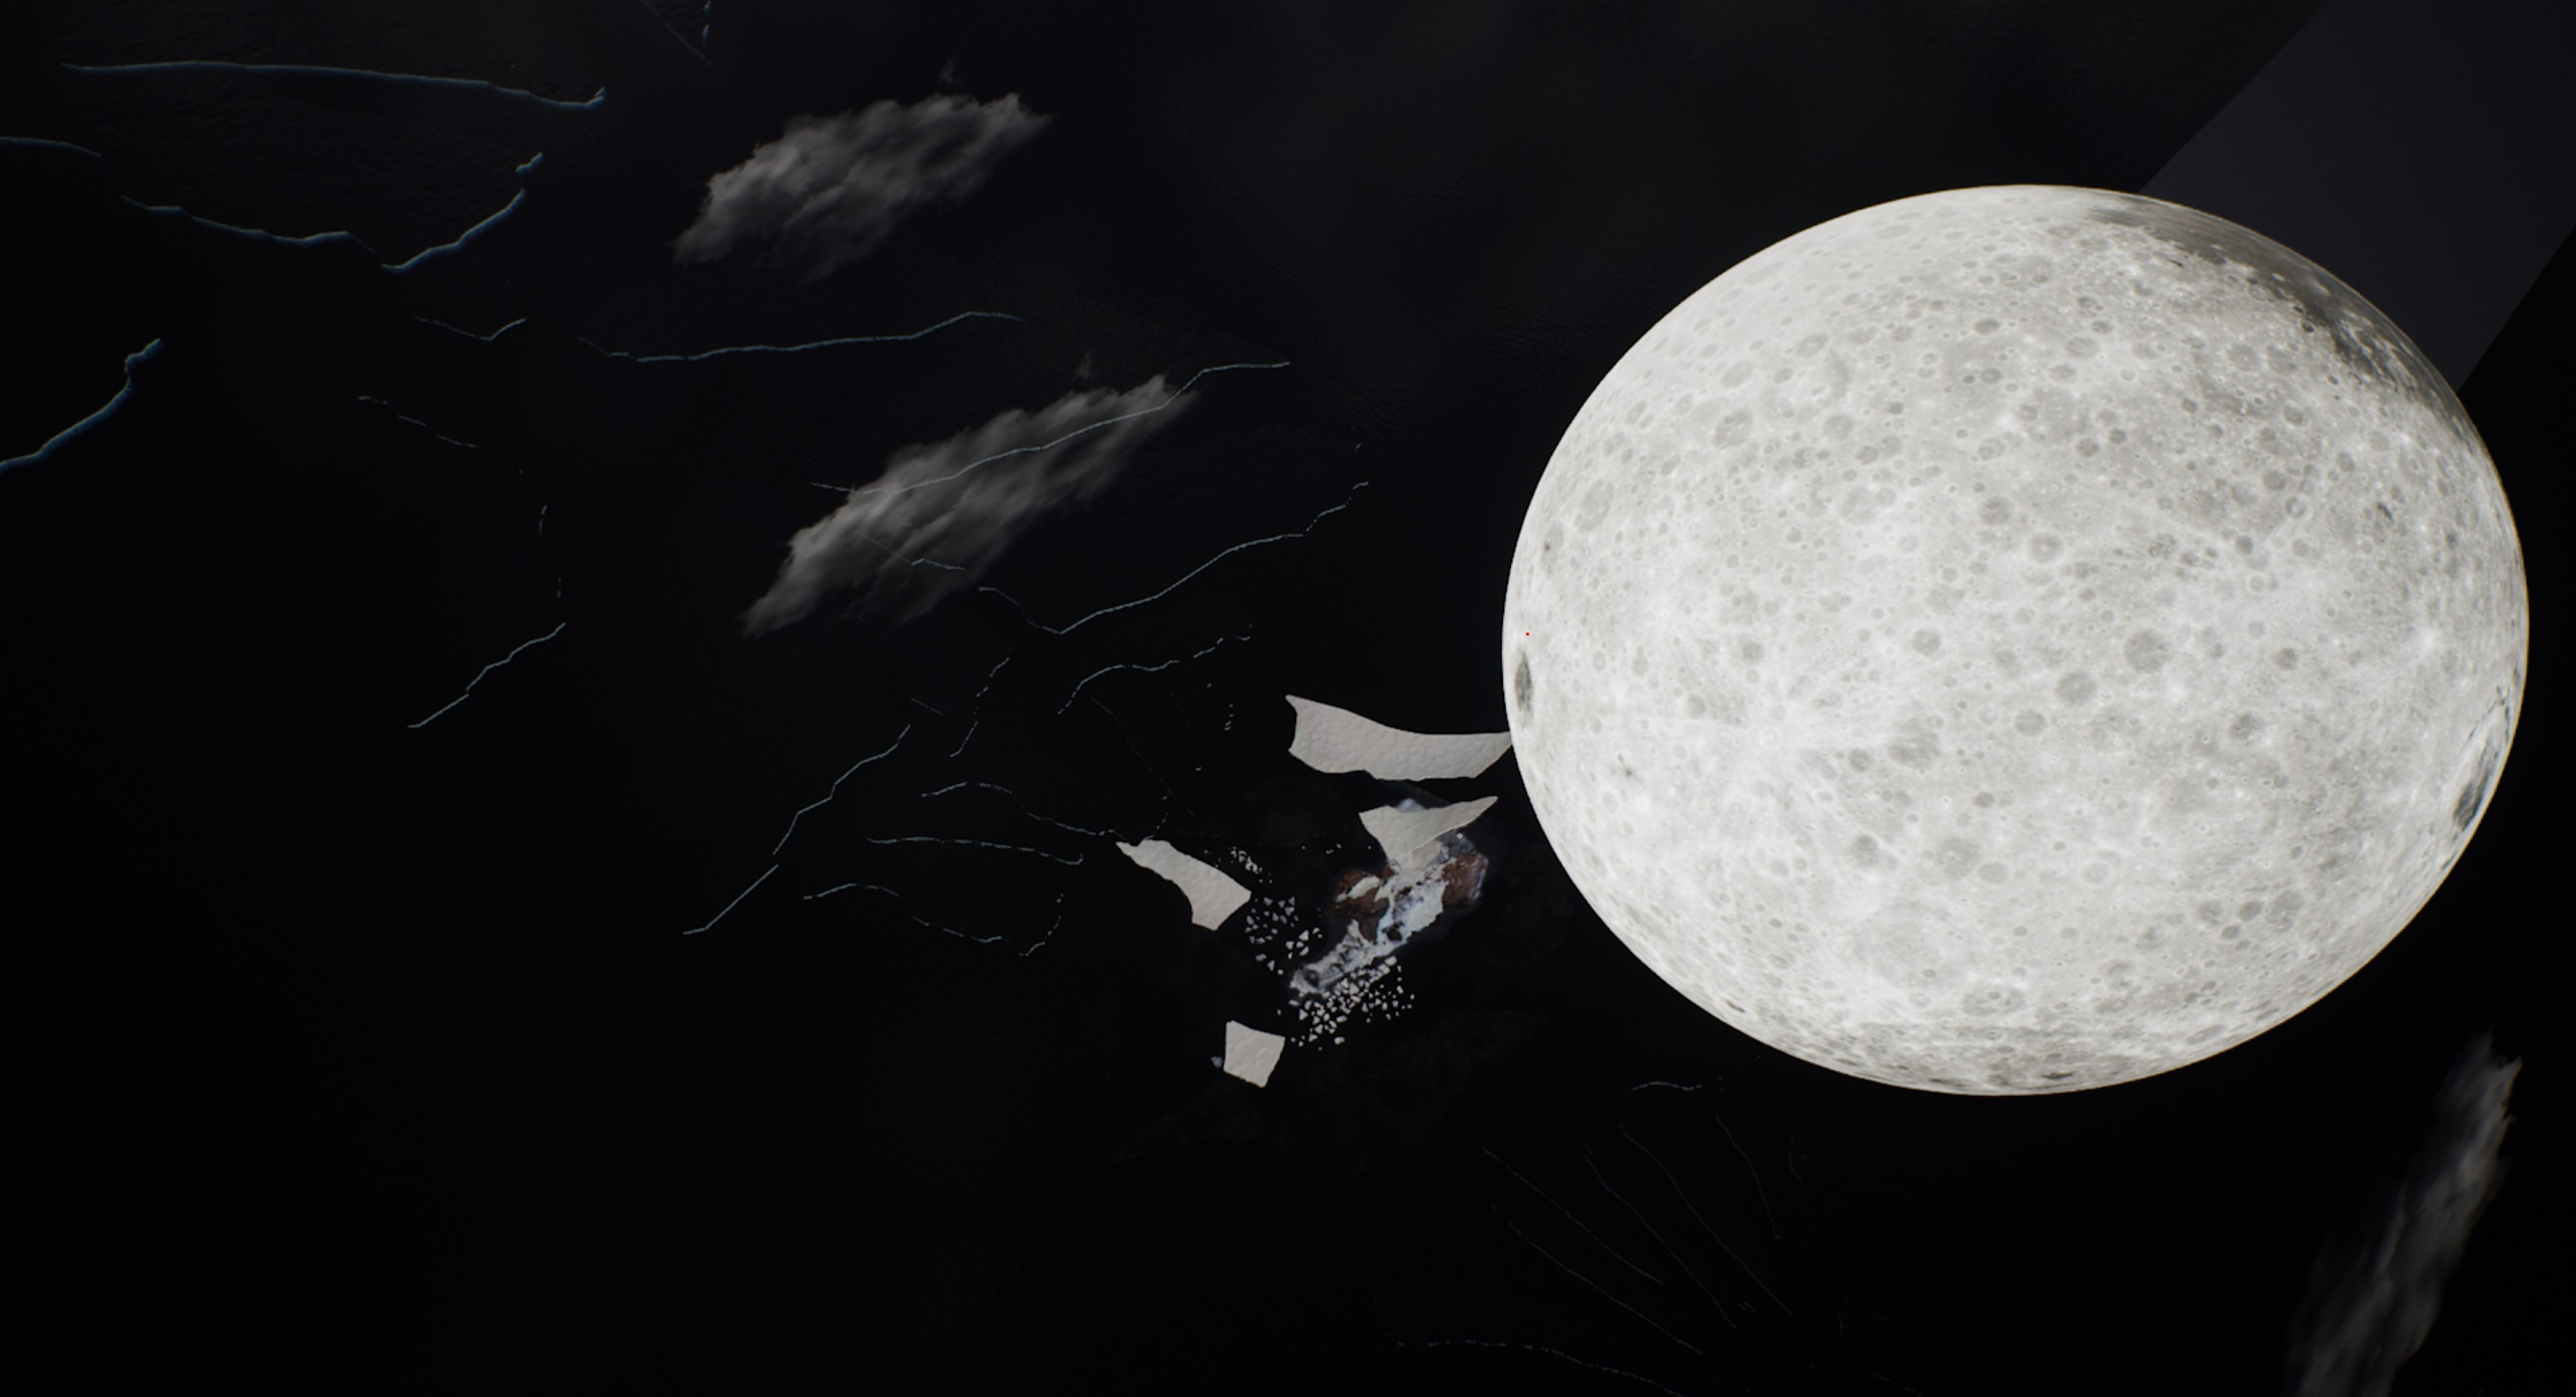 For the underwater portion, the moon is a bit closer than it should be for dramatic effect.